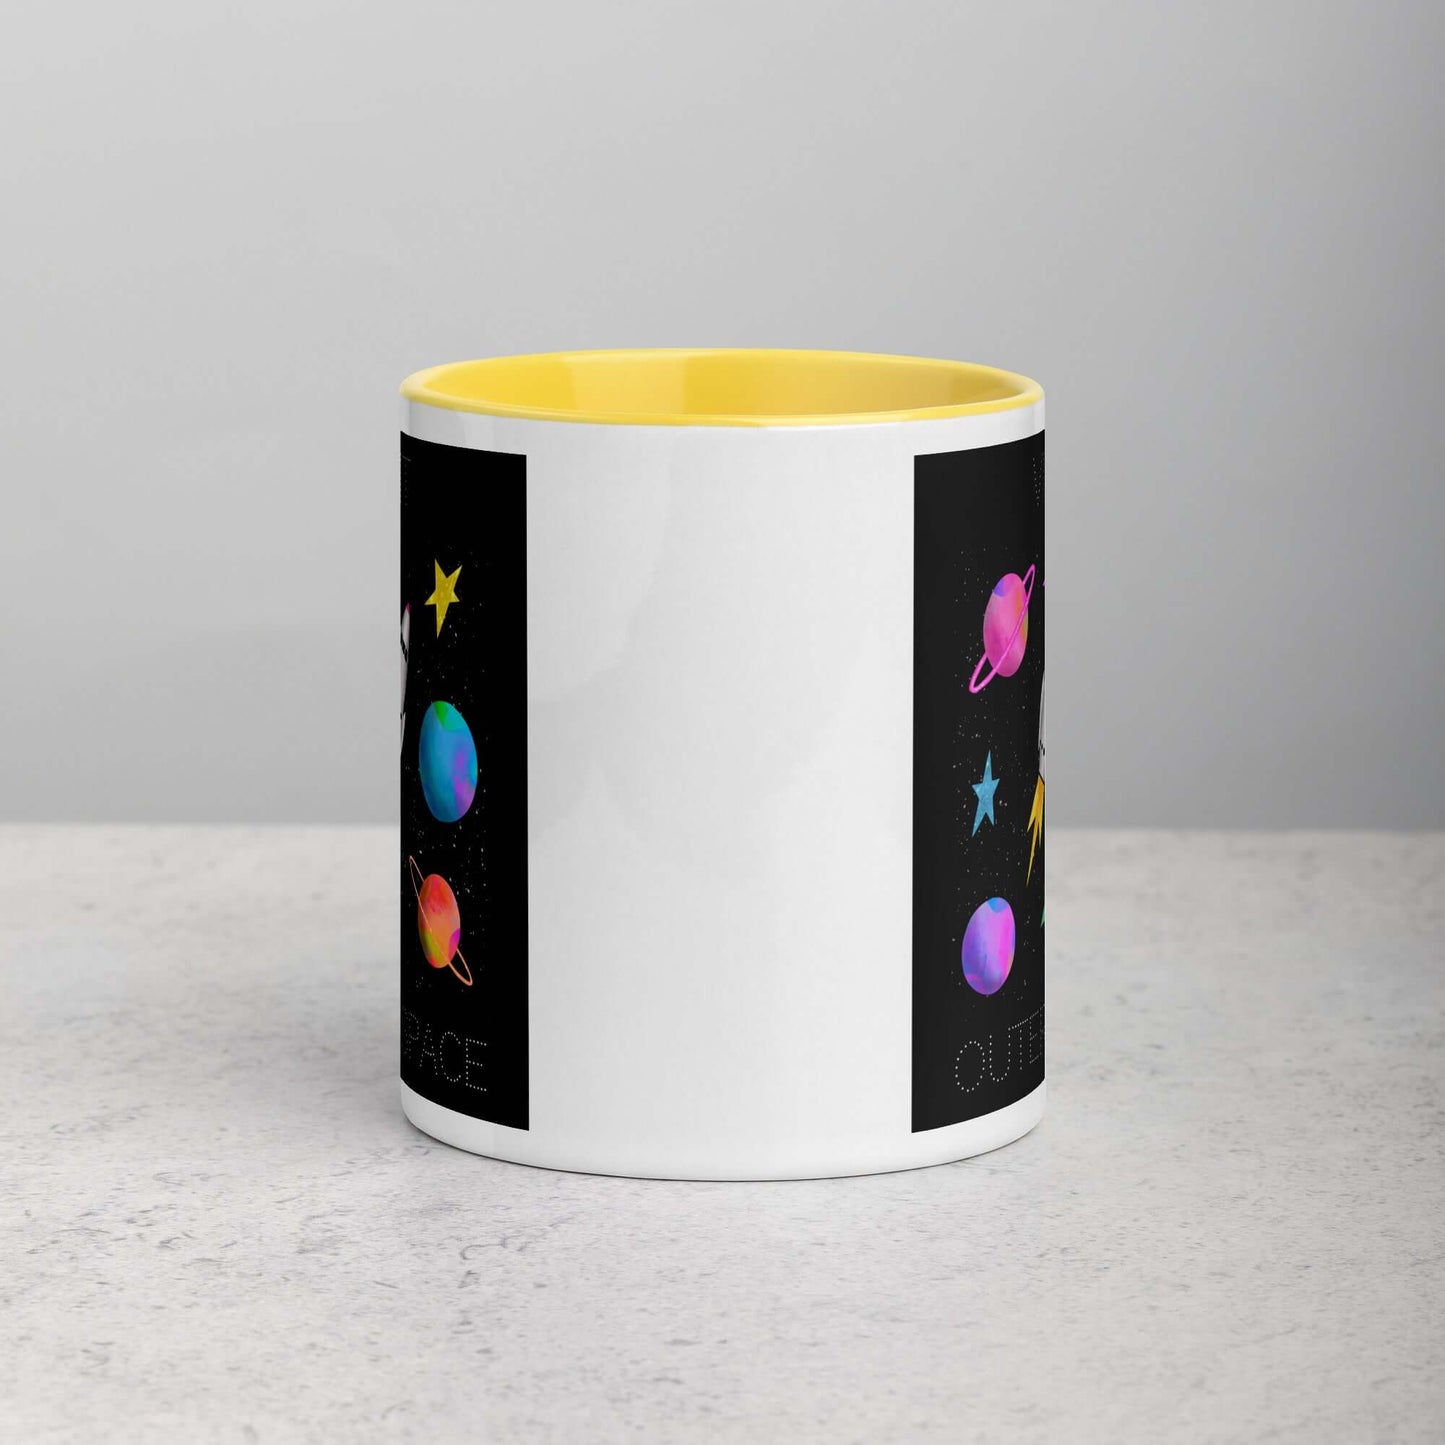 Whimsical Space Rocket with Colorful Planets and Stars on Black Background with Text “Visit Outer Space” Mug with Bright Yellow Color Inside Side View